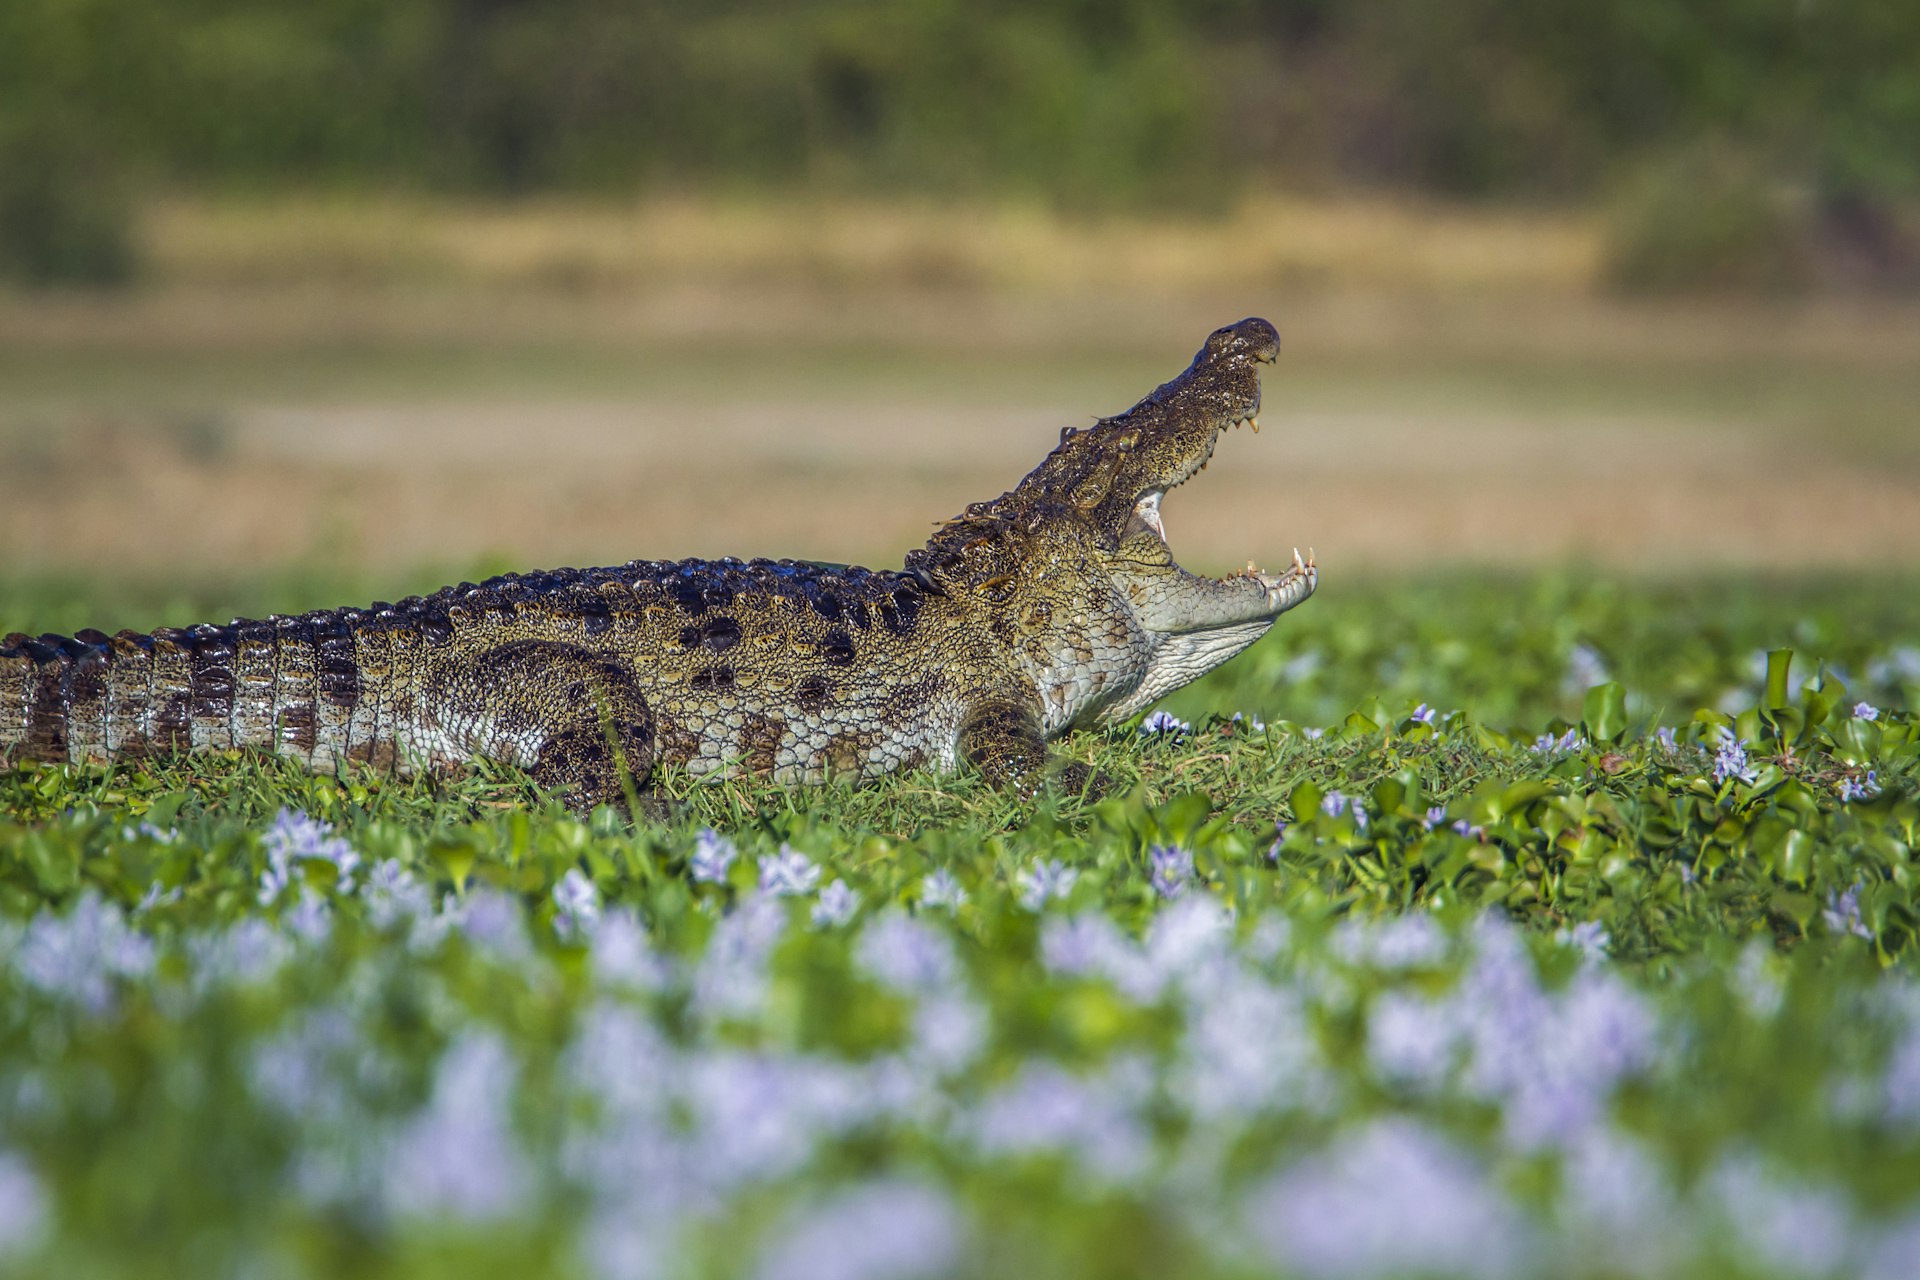 A mugger crocodile (Crocodilus palustris) with its jaws wide open in green marshland